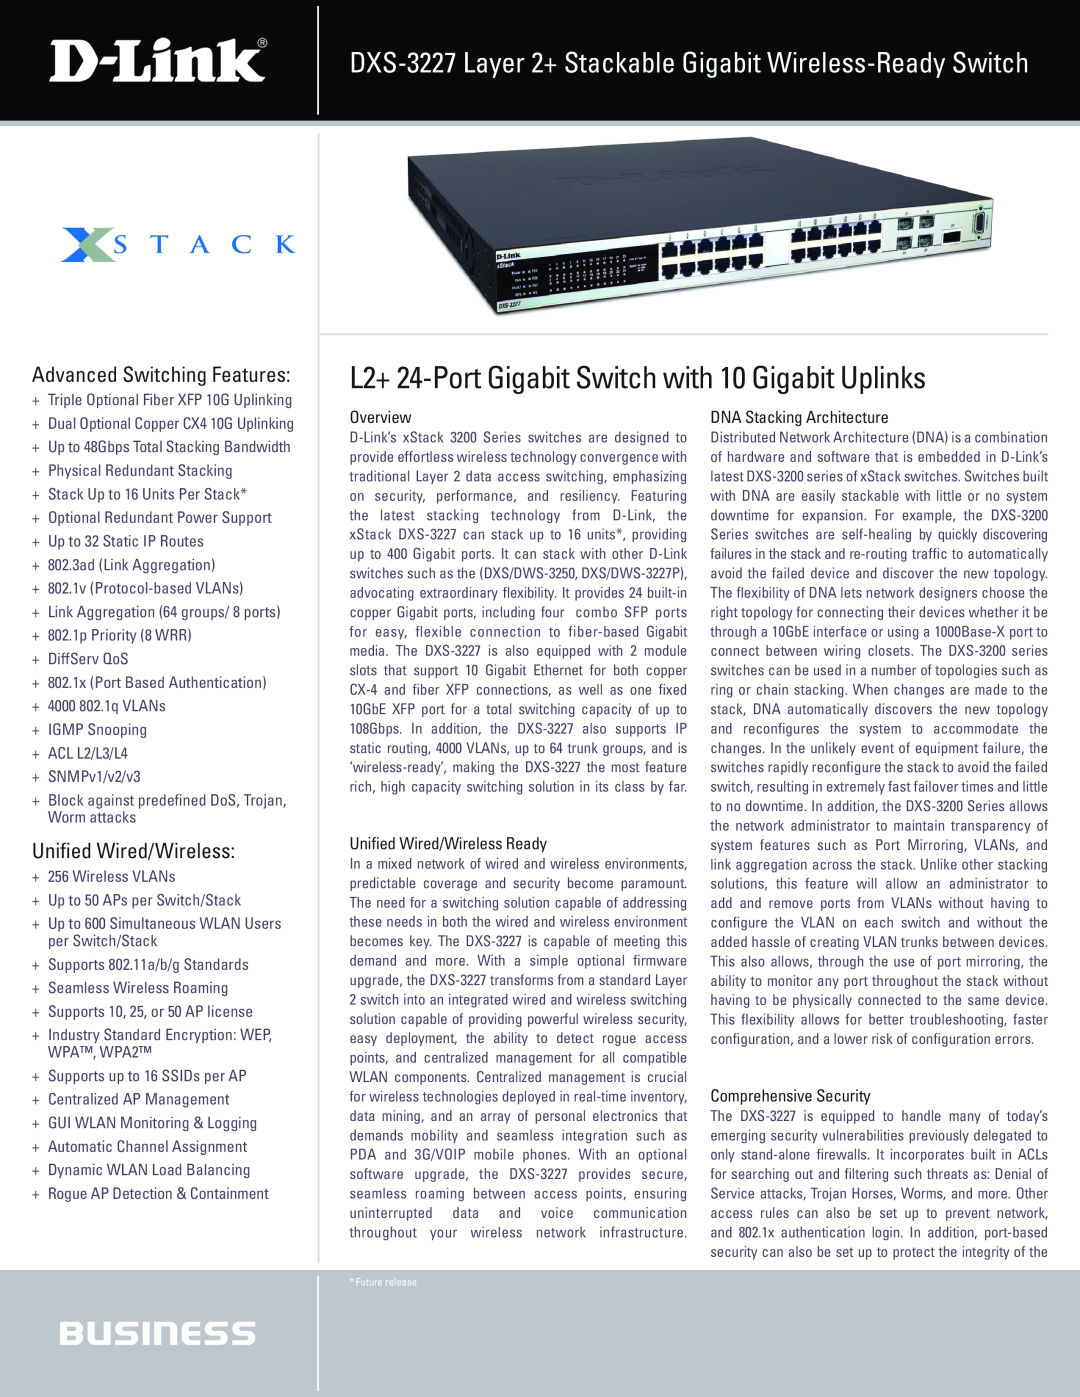 D-Link DXS-3227 manual L2+ 24-Port Gigabit Switch with 10 Gigabit Uplinks, Advanced Switching Features, Overview 